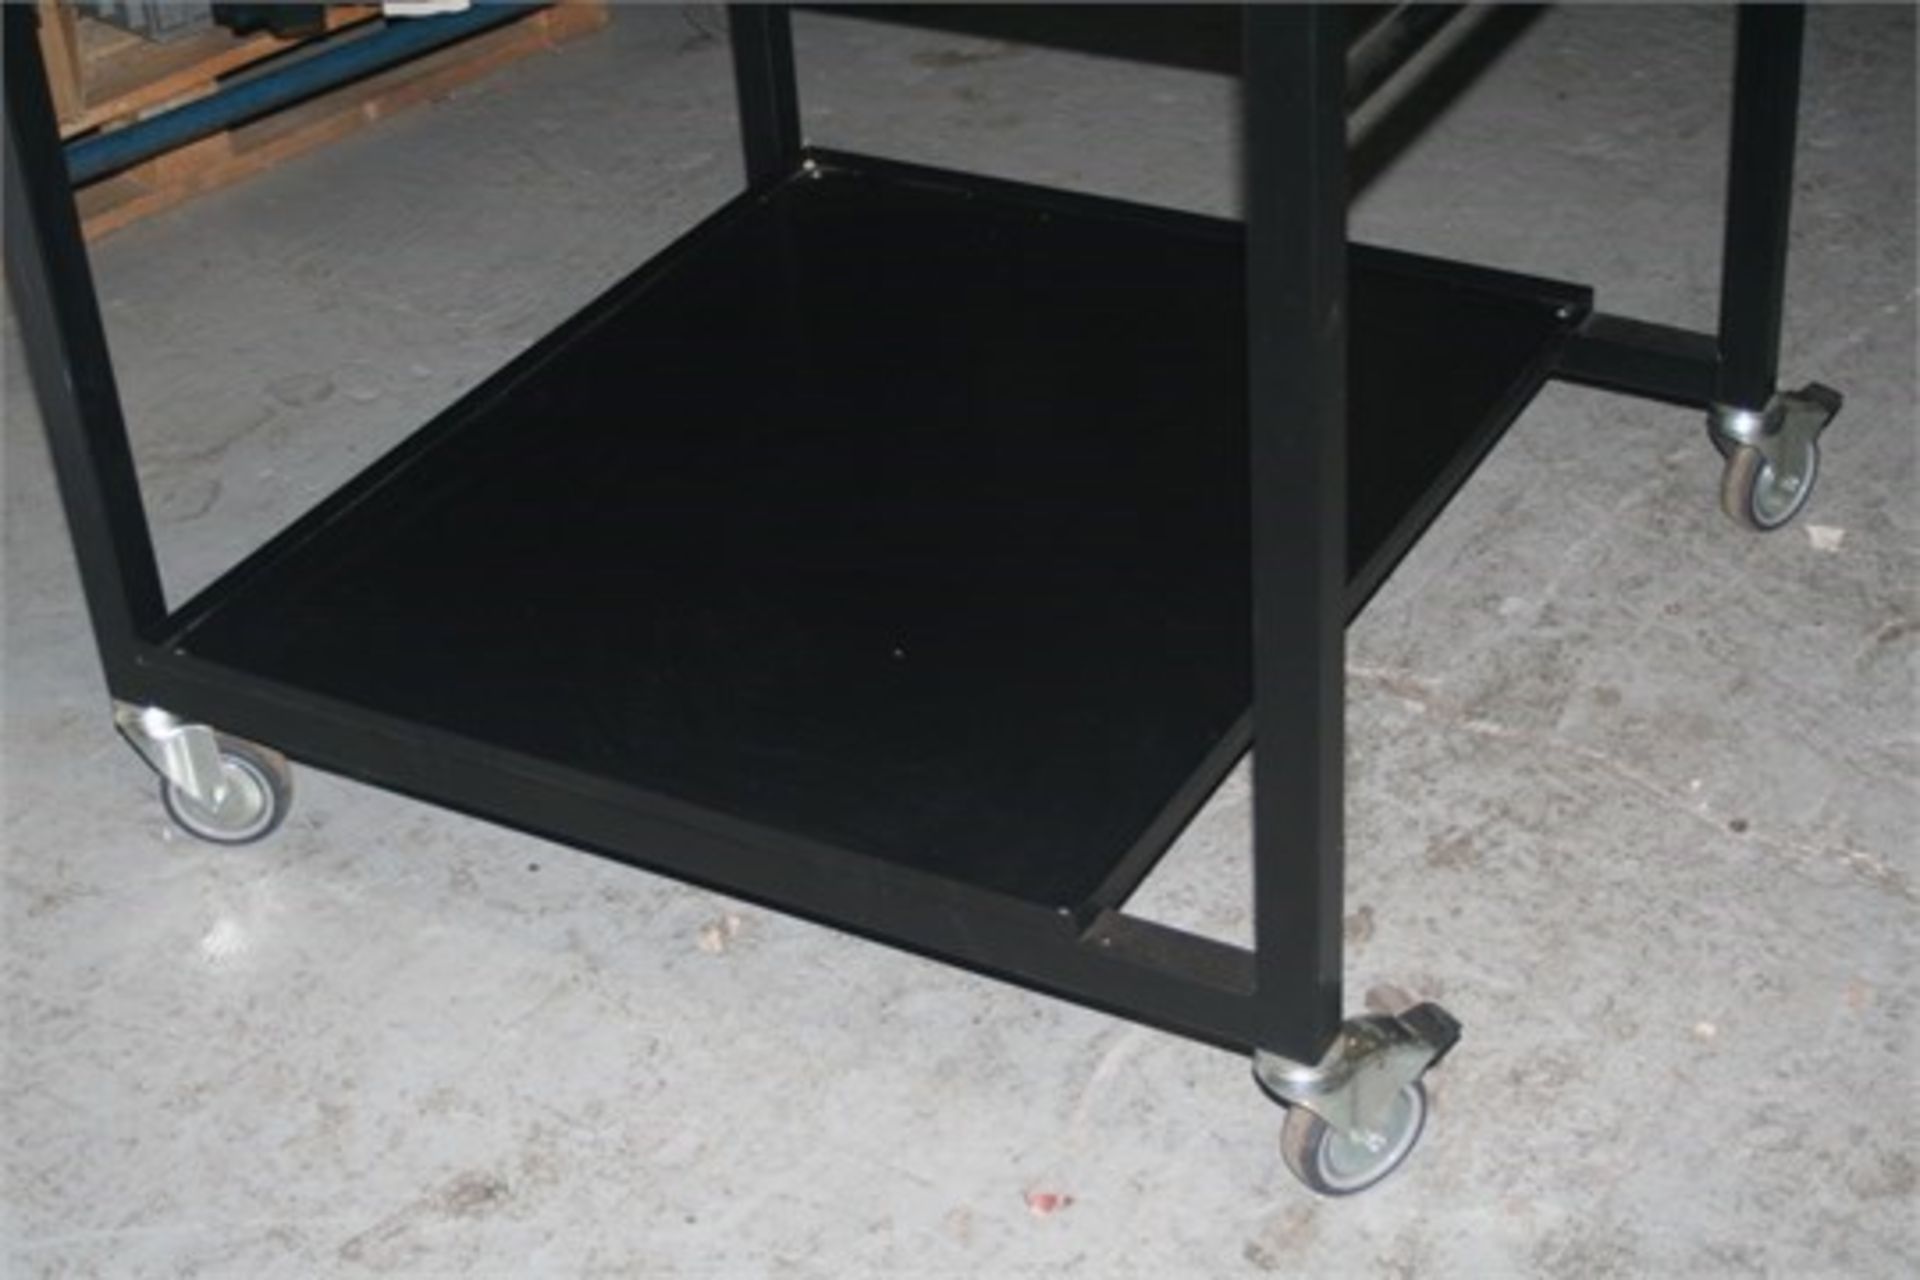 1 x Mobile Work Table - Large Size With Undershelf and Heavy Duty Castor Wheels - Strong Build - Image 3 of 4